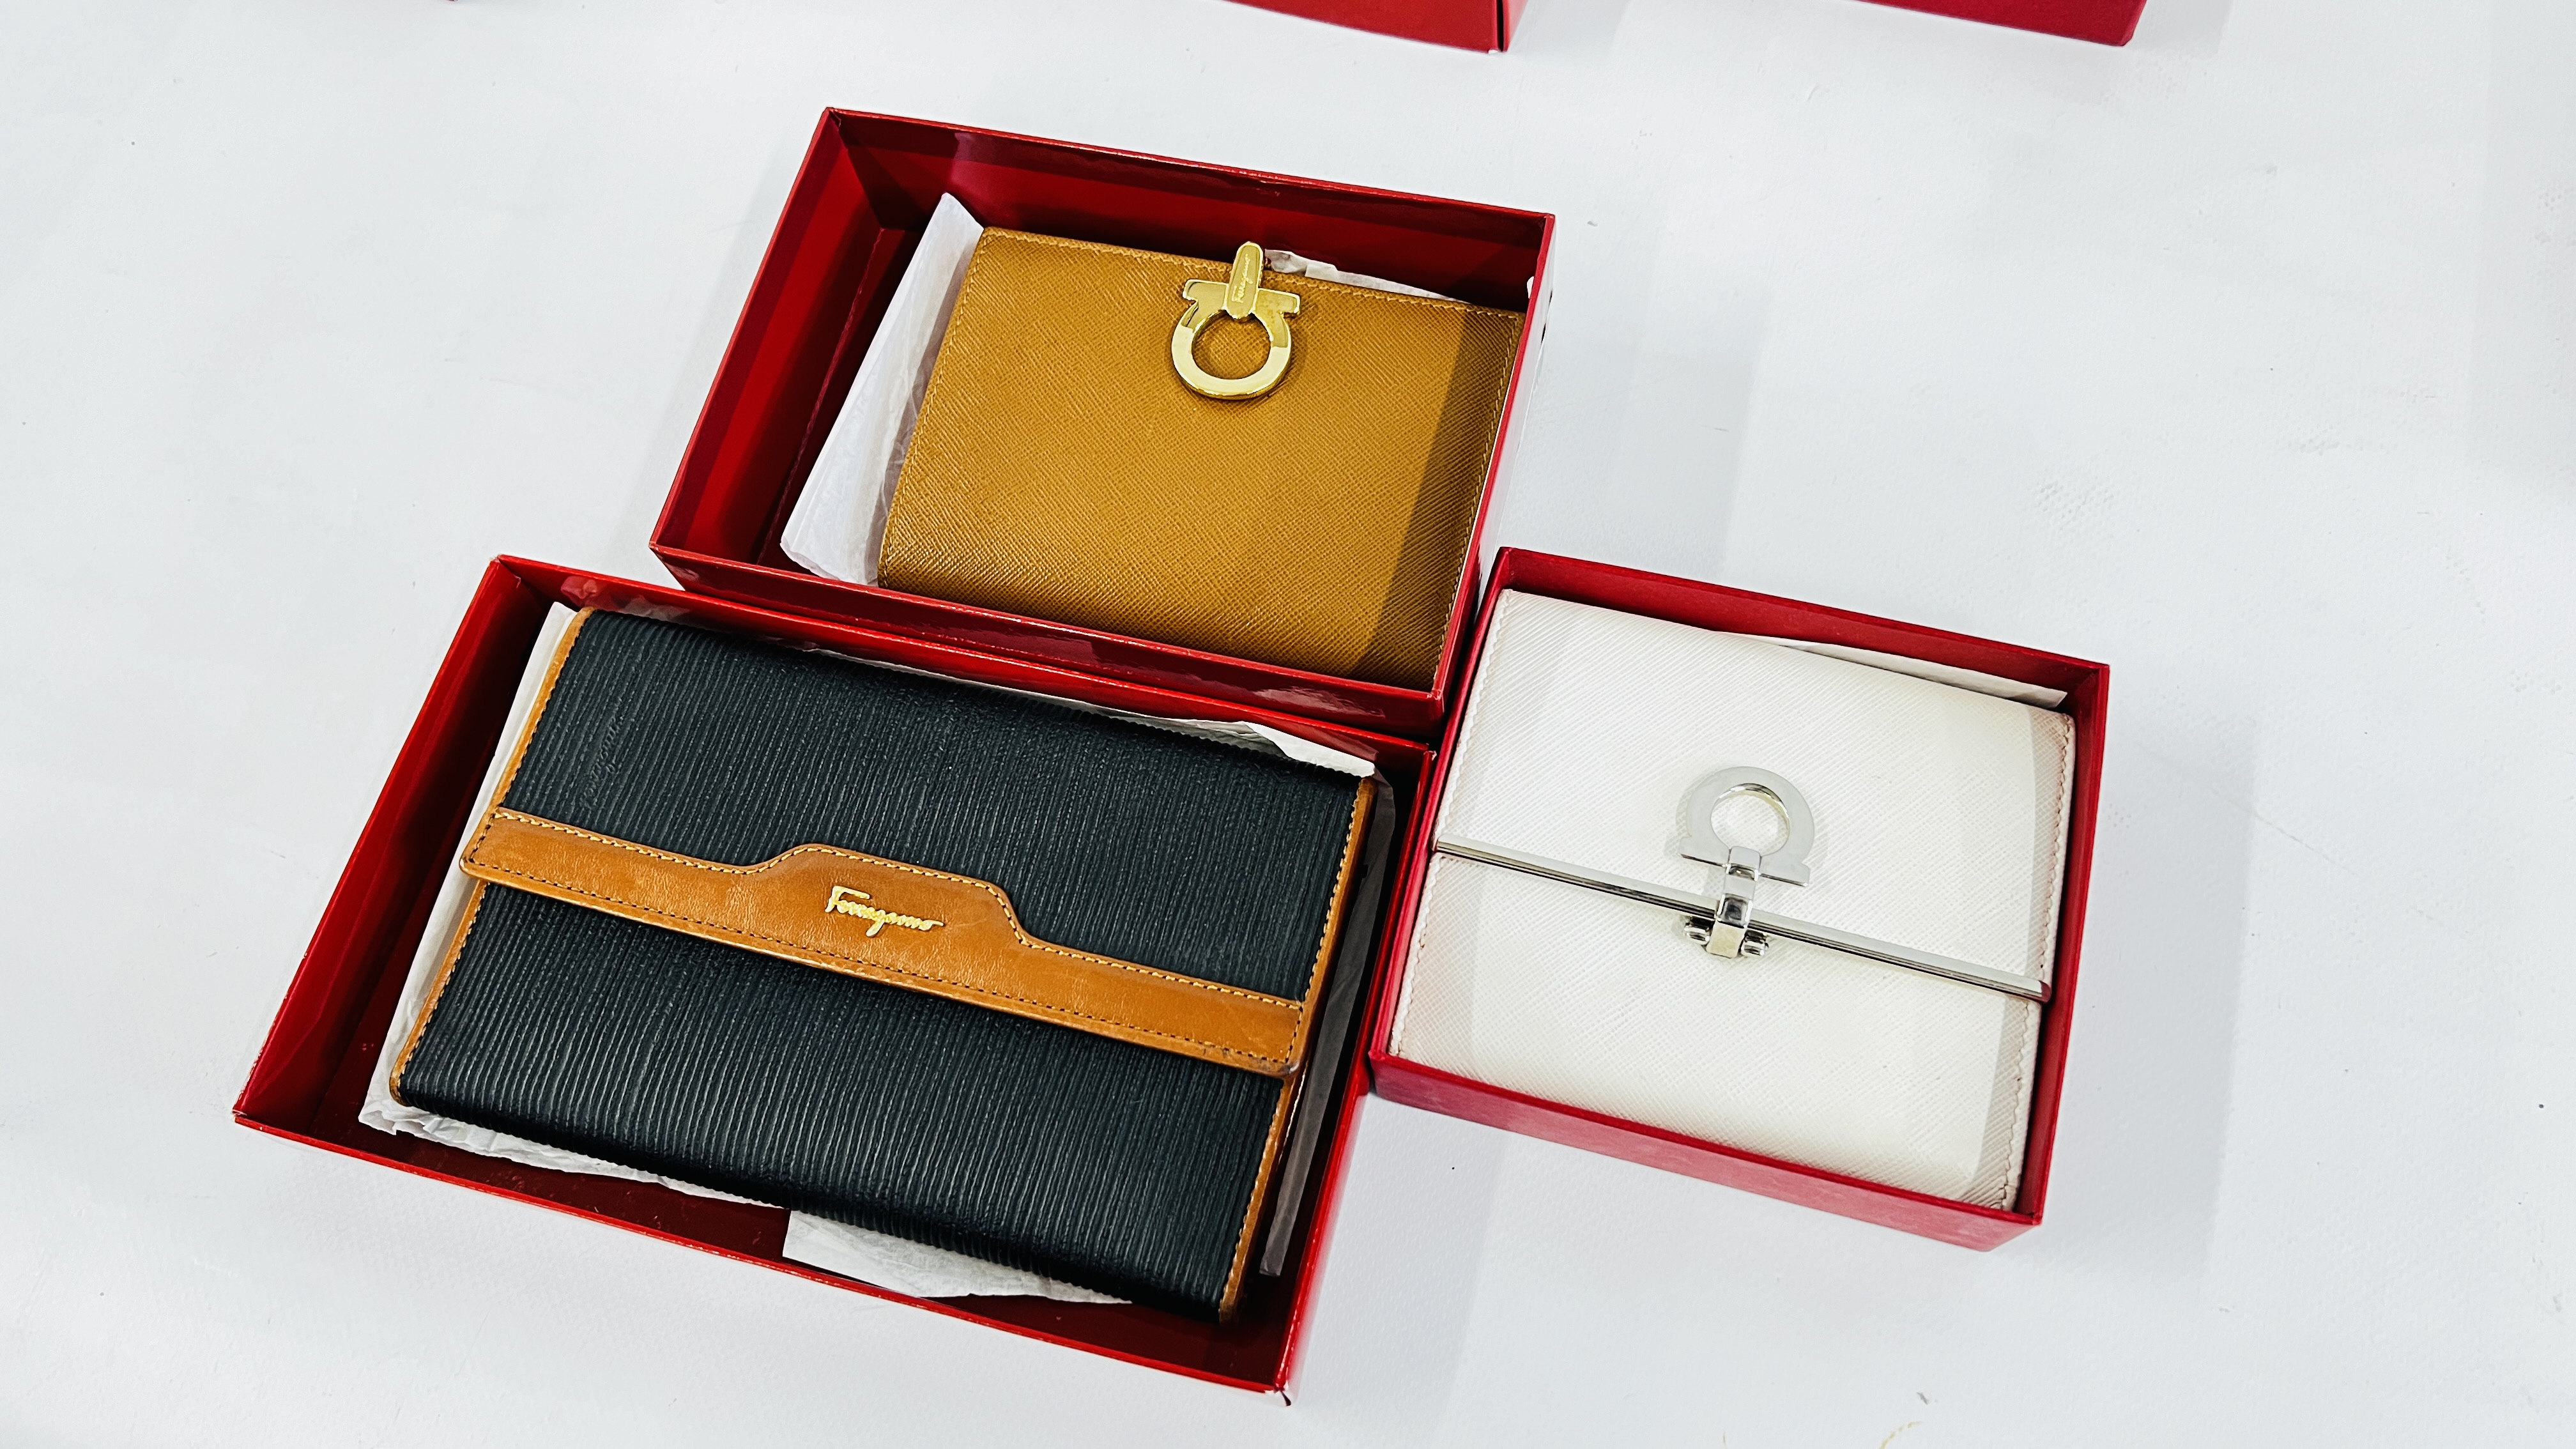 A GROUP OF 6 BOXED DESIGNER PURSES MARKED "SALVADOR FERRAGAMA". - Image 4 of 5